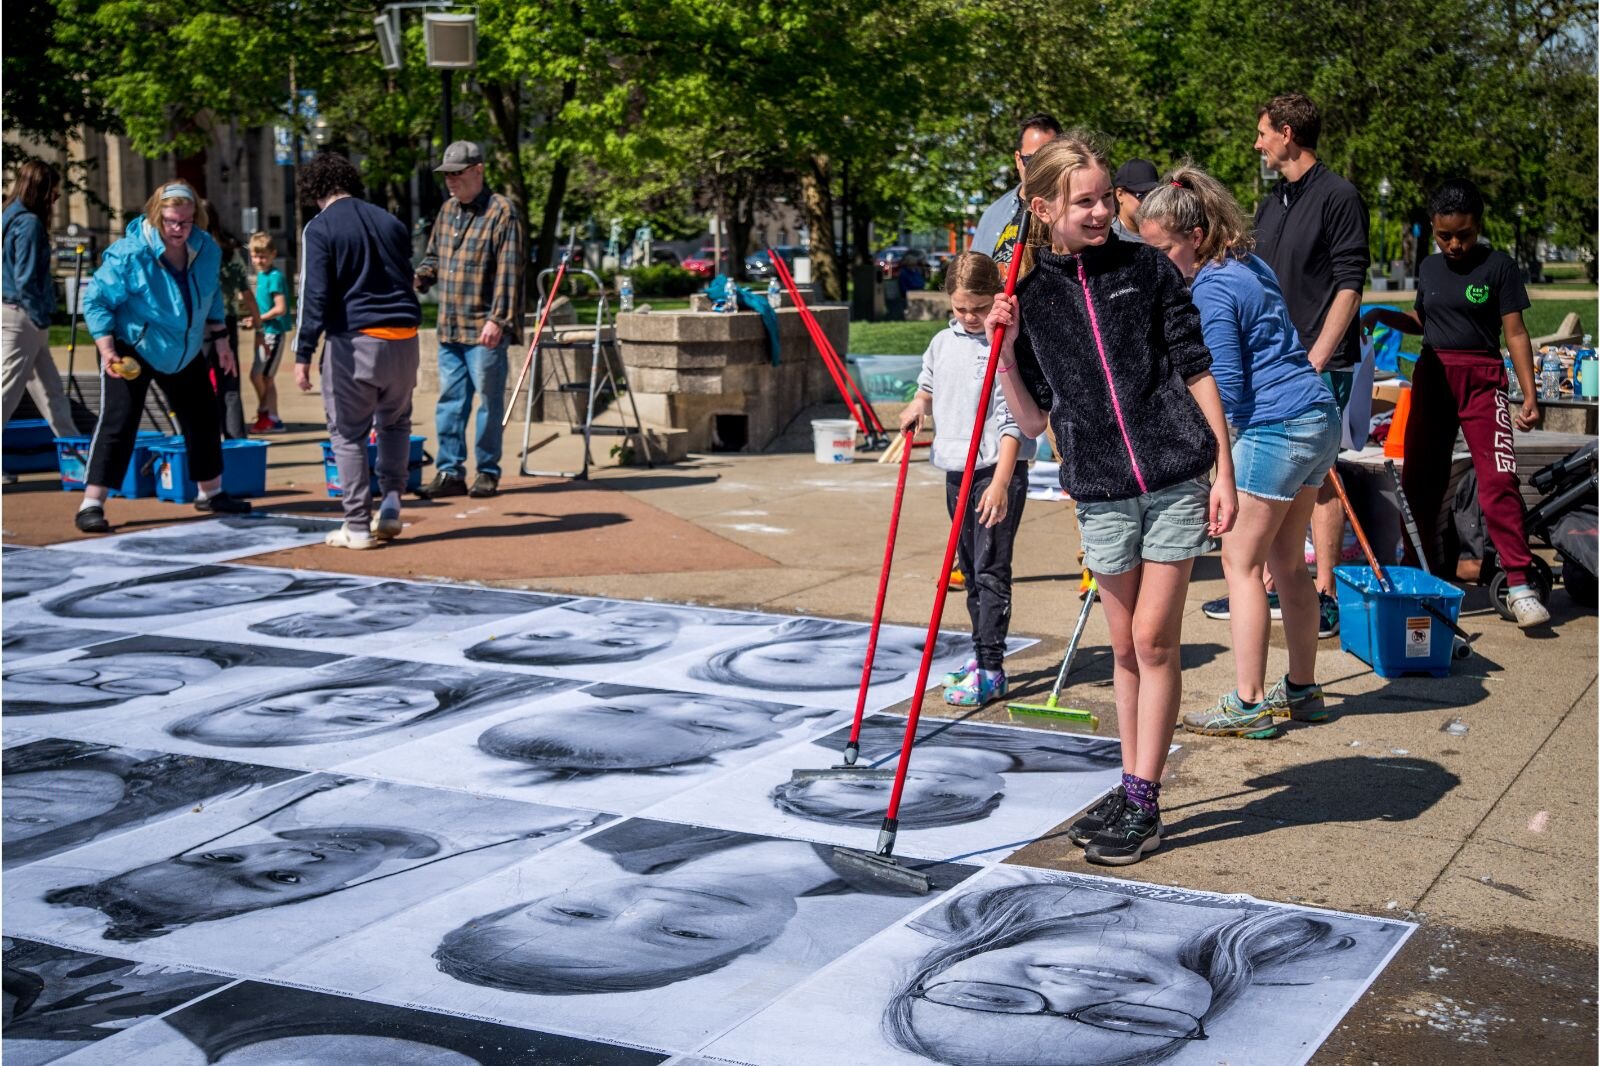 Over the course of a week, parents, students, and teachers volunteered to paste 4 1/2  X 3 feet black and white student portraits on the sidewalks of Bronson Park in preparation of the All-District Art Fair on Friday, May 19. 